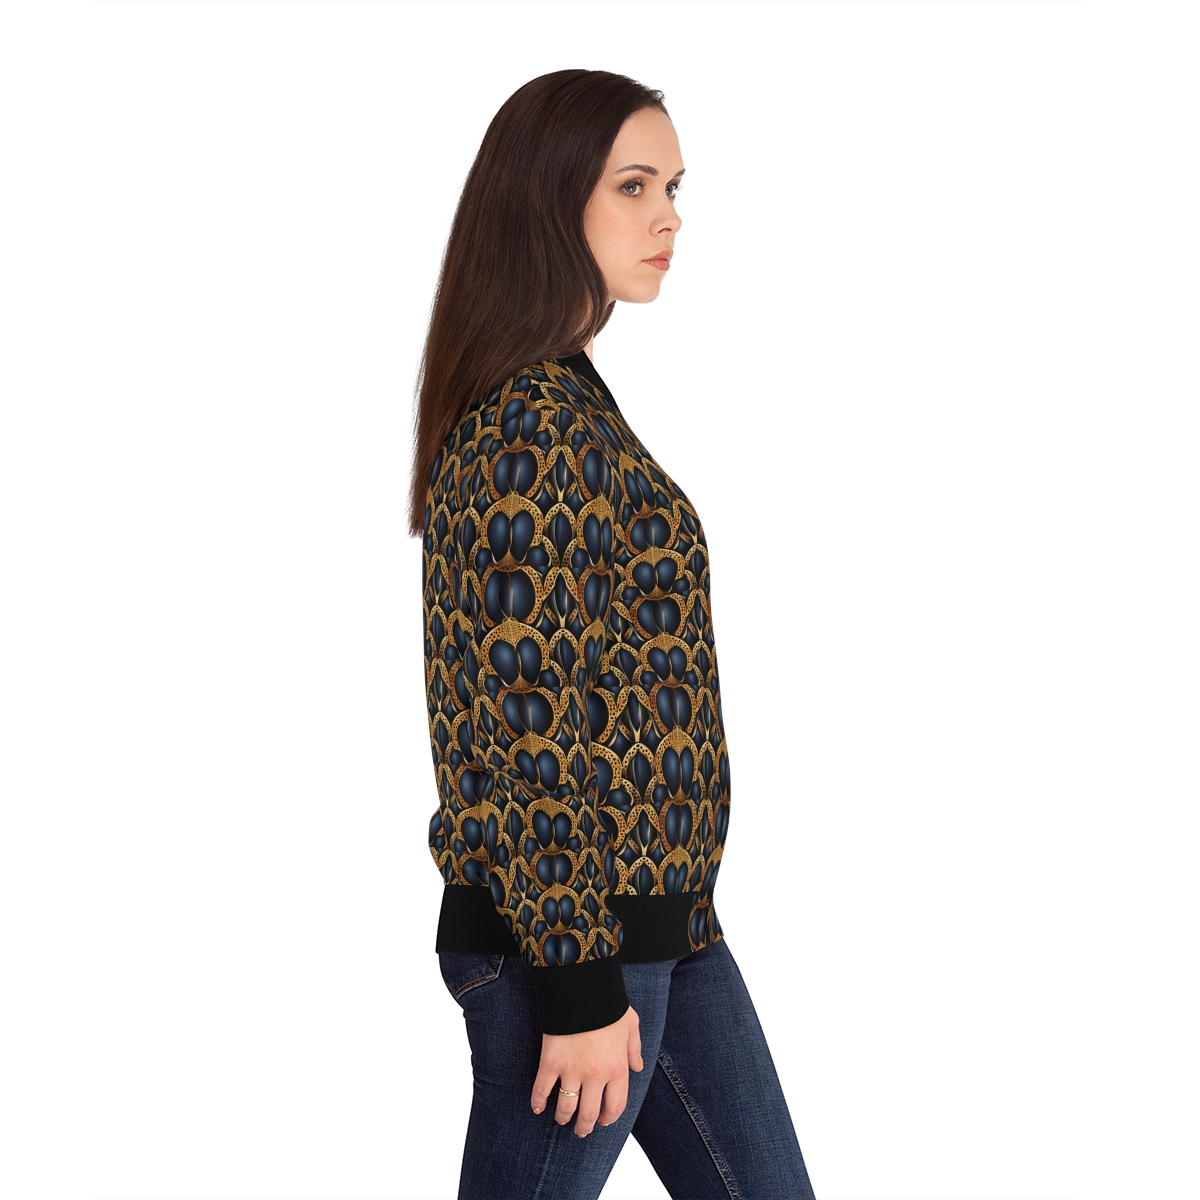 The "Blue Lotus" Bomber by Rob Dickens - Women's Bomber Jacket product thumbnail image